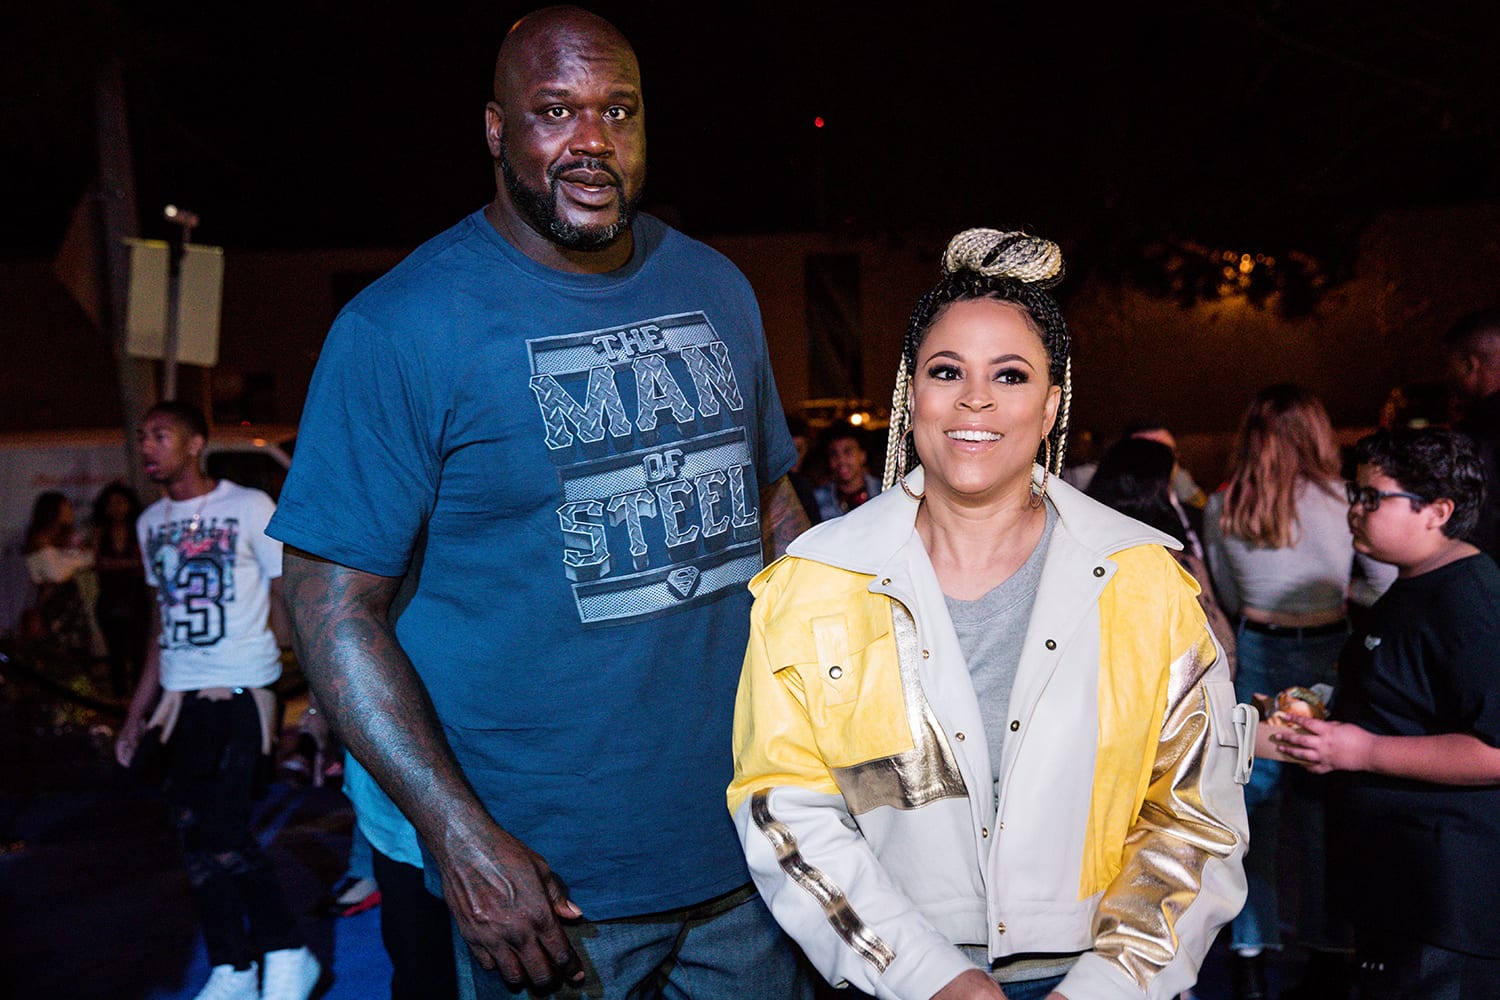 Hoopz married shaquille oneal and Inside NBA